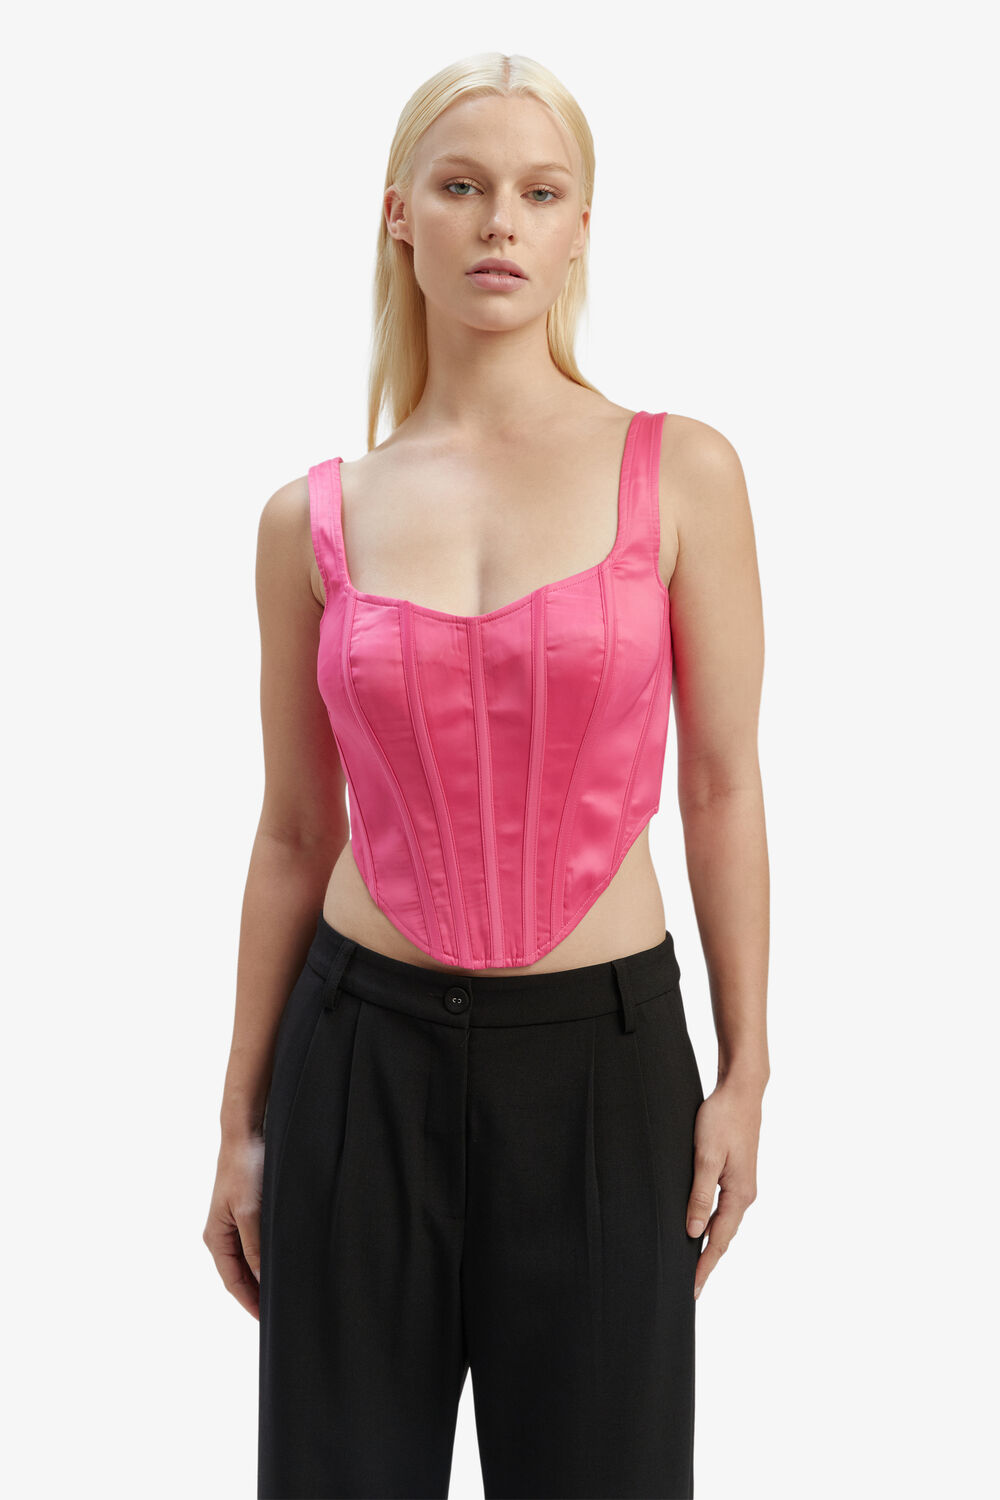 SATIN CORSET BUSTIER in colour HOT PINK